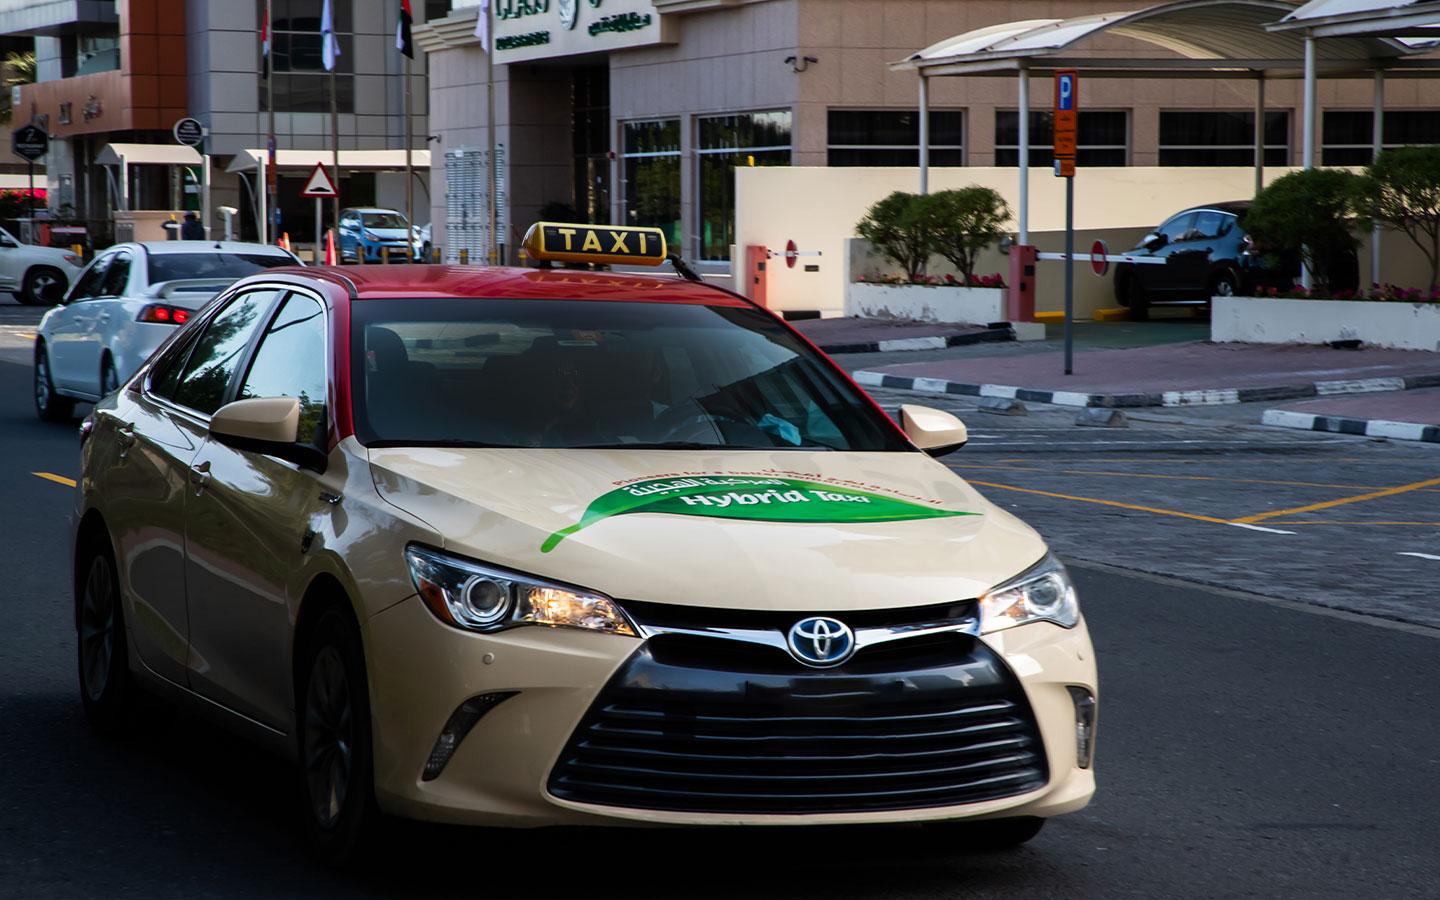 You must know the rules of Request for Issuing Taxi Vehicles Advertisements Permit